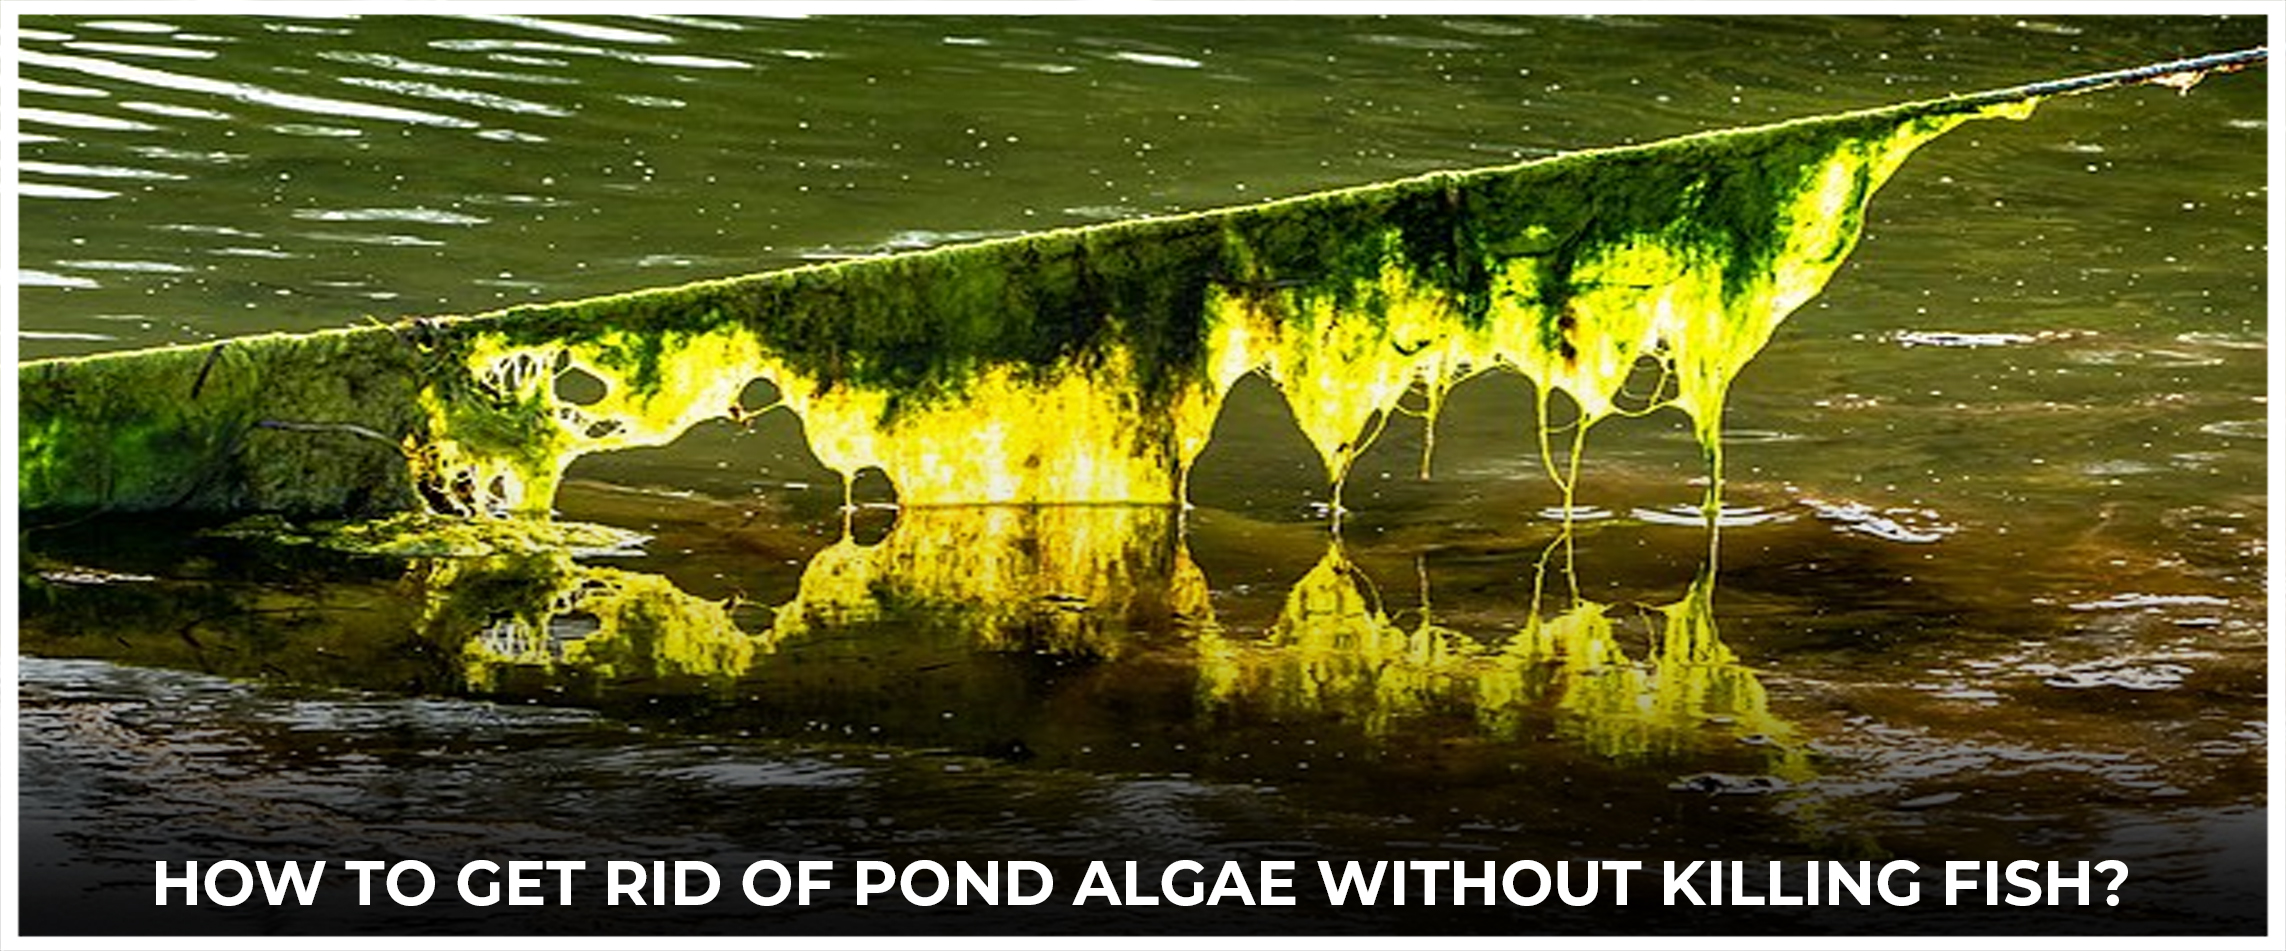 How To Get Rid Of Pond Algae Without Killing Fish